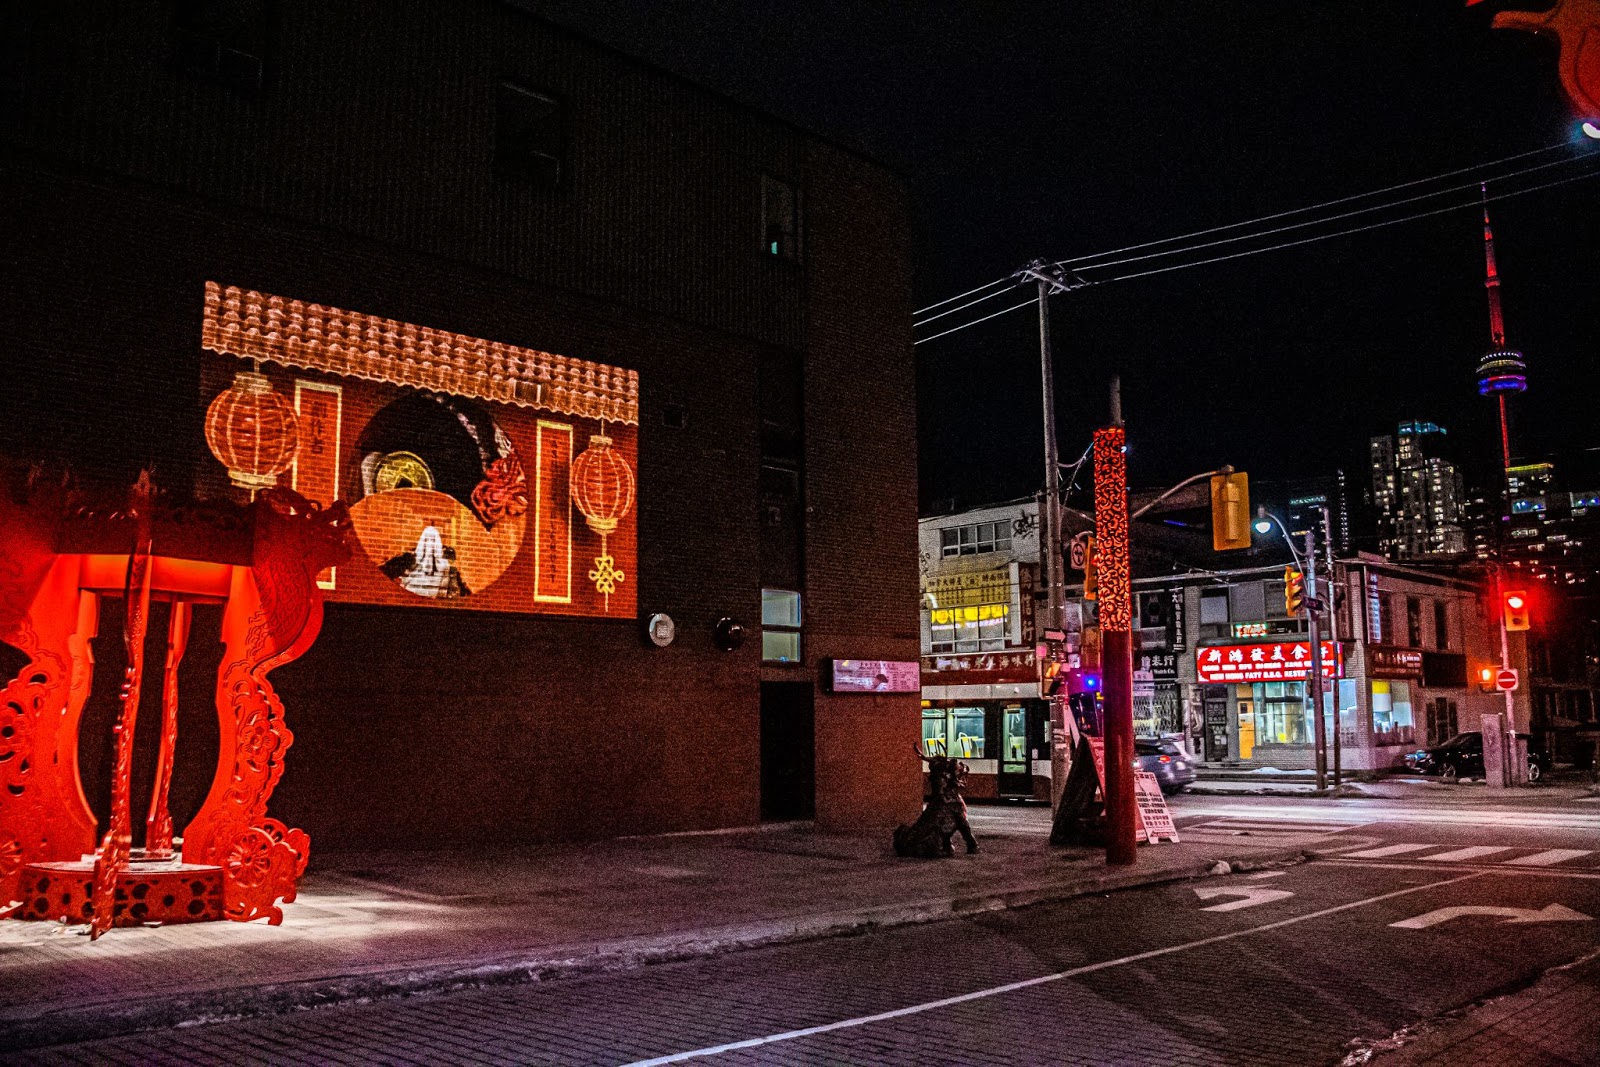 Large digital projection public art installation in evening streets of Toronto's Chinatown. It is projected against a brick wall with animations created by community participants